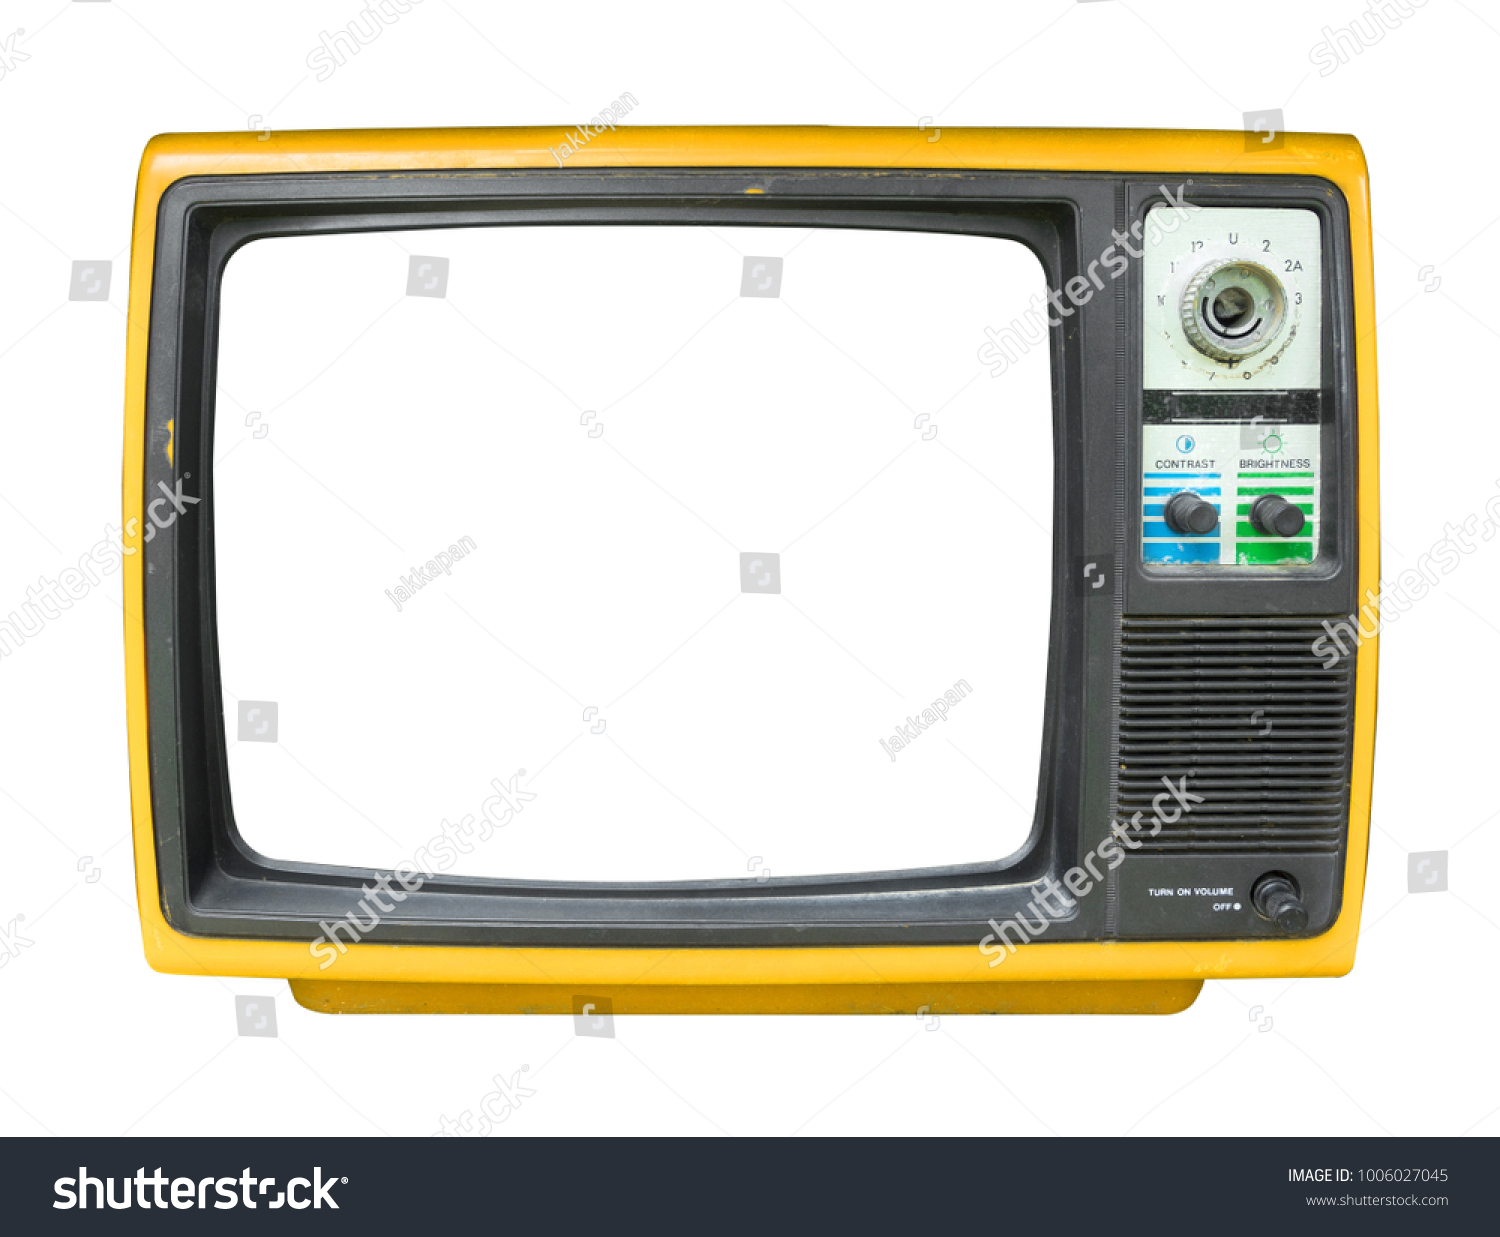 Retro television - old vintage TV with frame screen isolate on white with clipping path for object, retro technology #1006027045